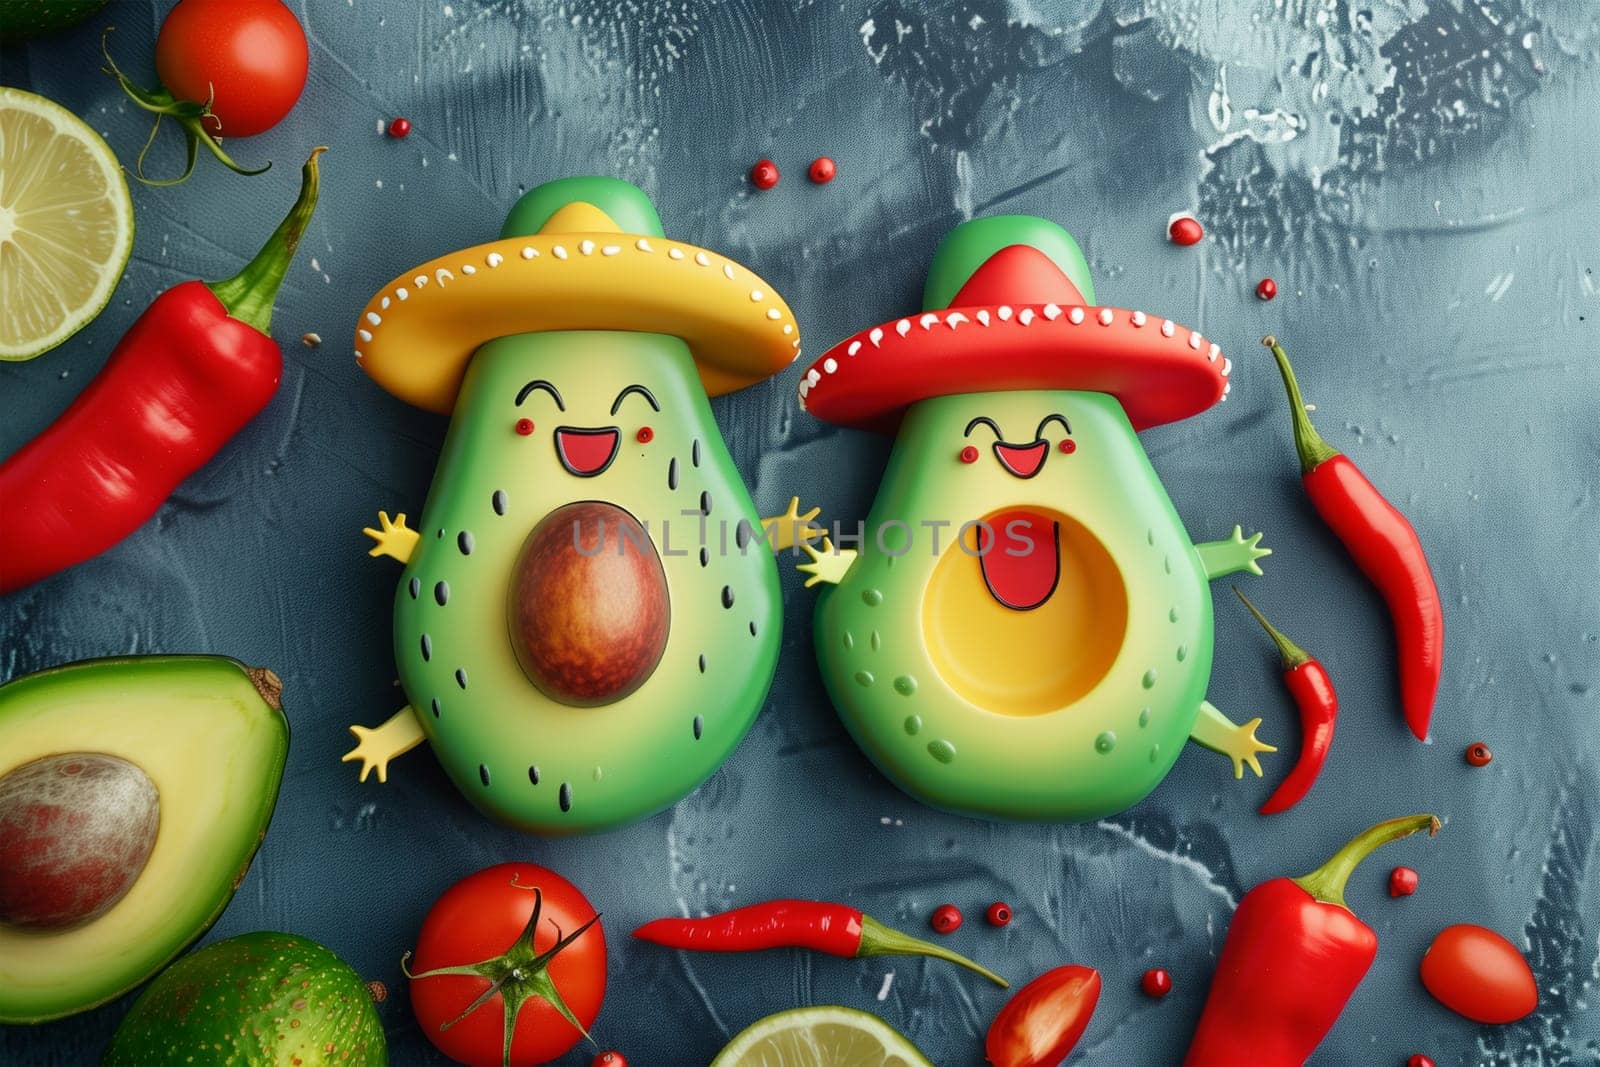 Cinco De Mayo Celebration With Avocado Characters Wearing Sombreros on a Festive Background. by Sd28DimoN_1976